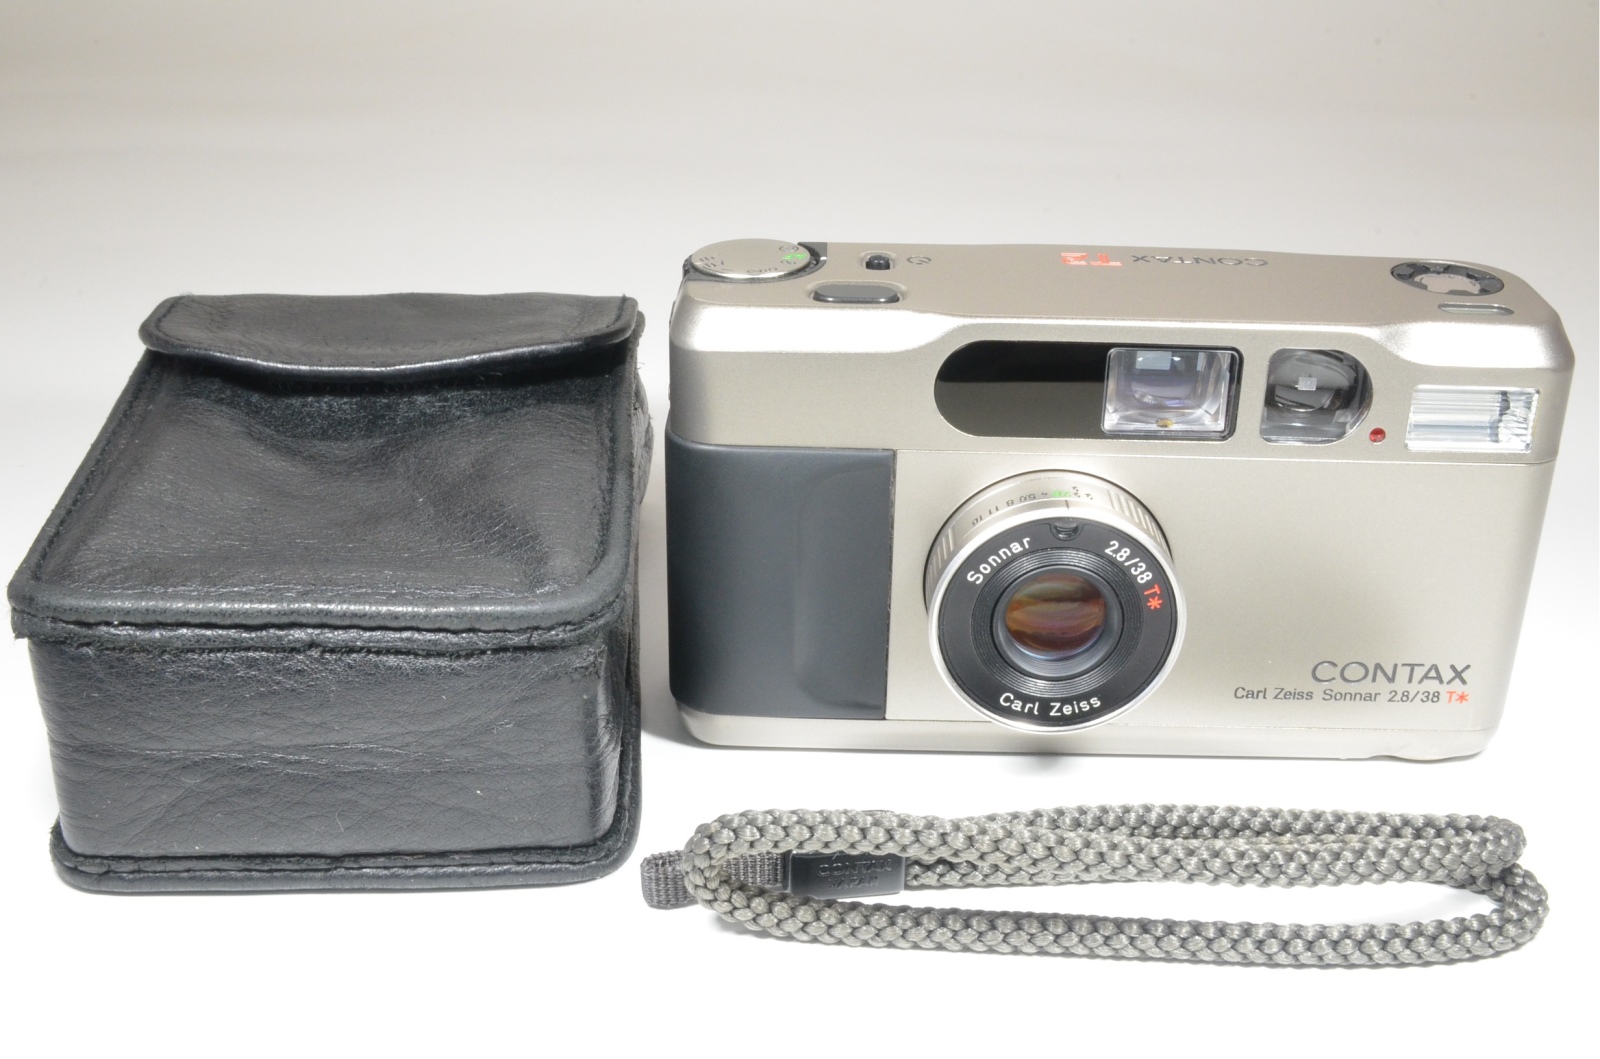 contax t2 titanium silver point & shoot 35mm film camera #a1106 from japan